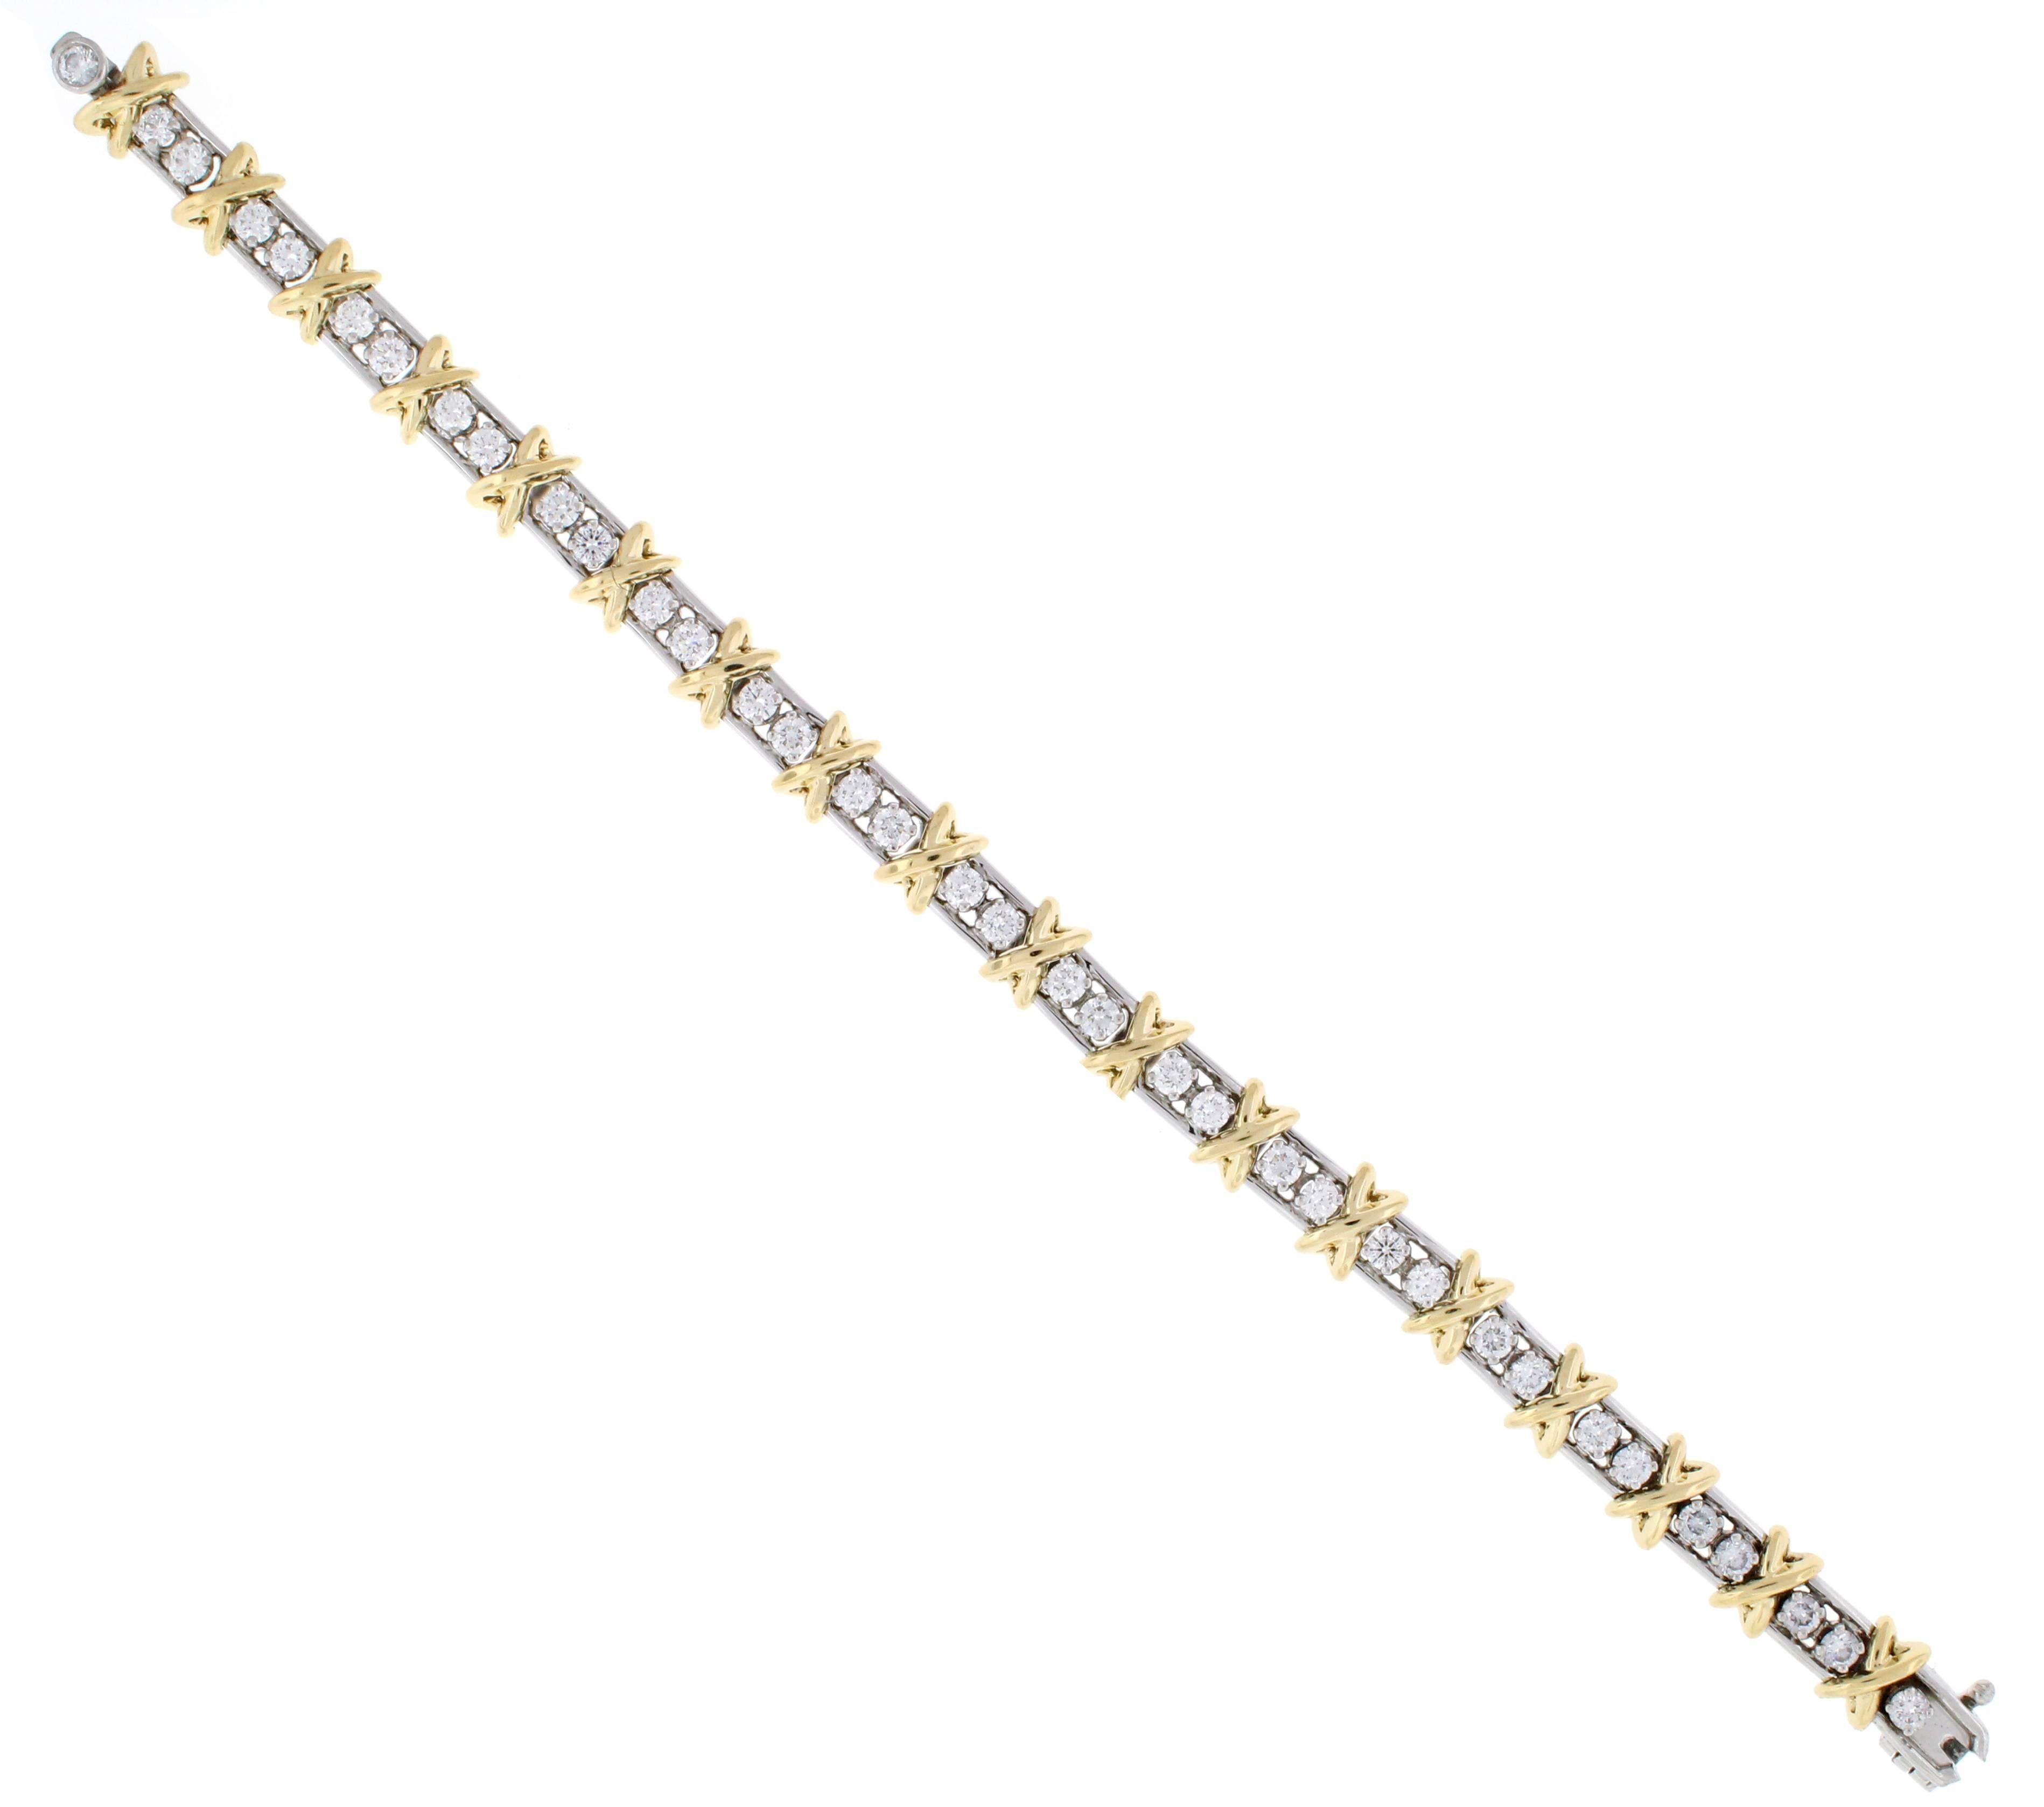 Jean Schlumberger’s rendition of an “X,” the popular symbol of love. The bracelet is in platinum and 18 karat yellow gold with 36 round brilliant diamonds weighing 3.00 carats. Diamonds are F color and VVS clarity. The bracelet is in excellent